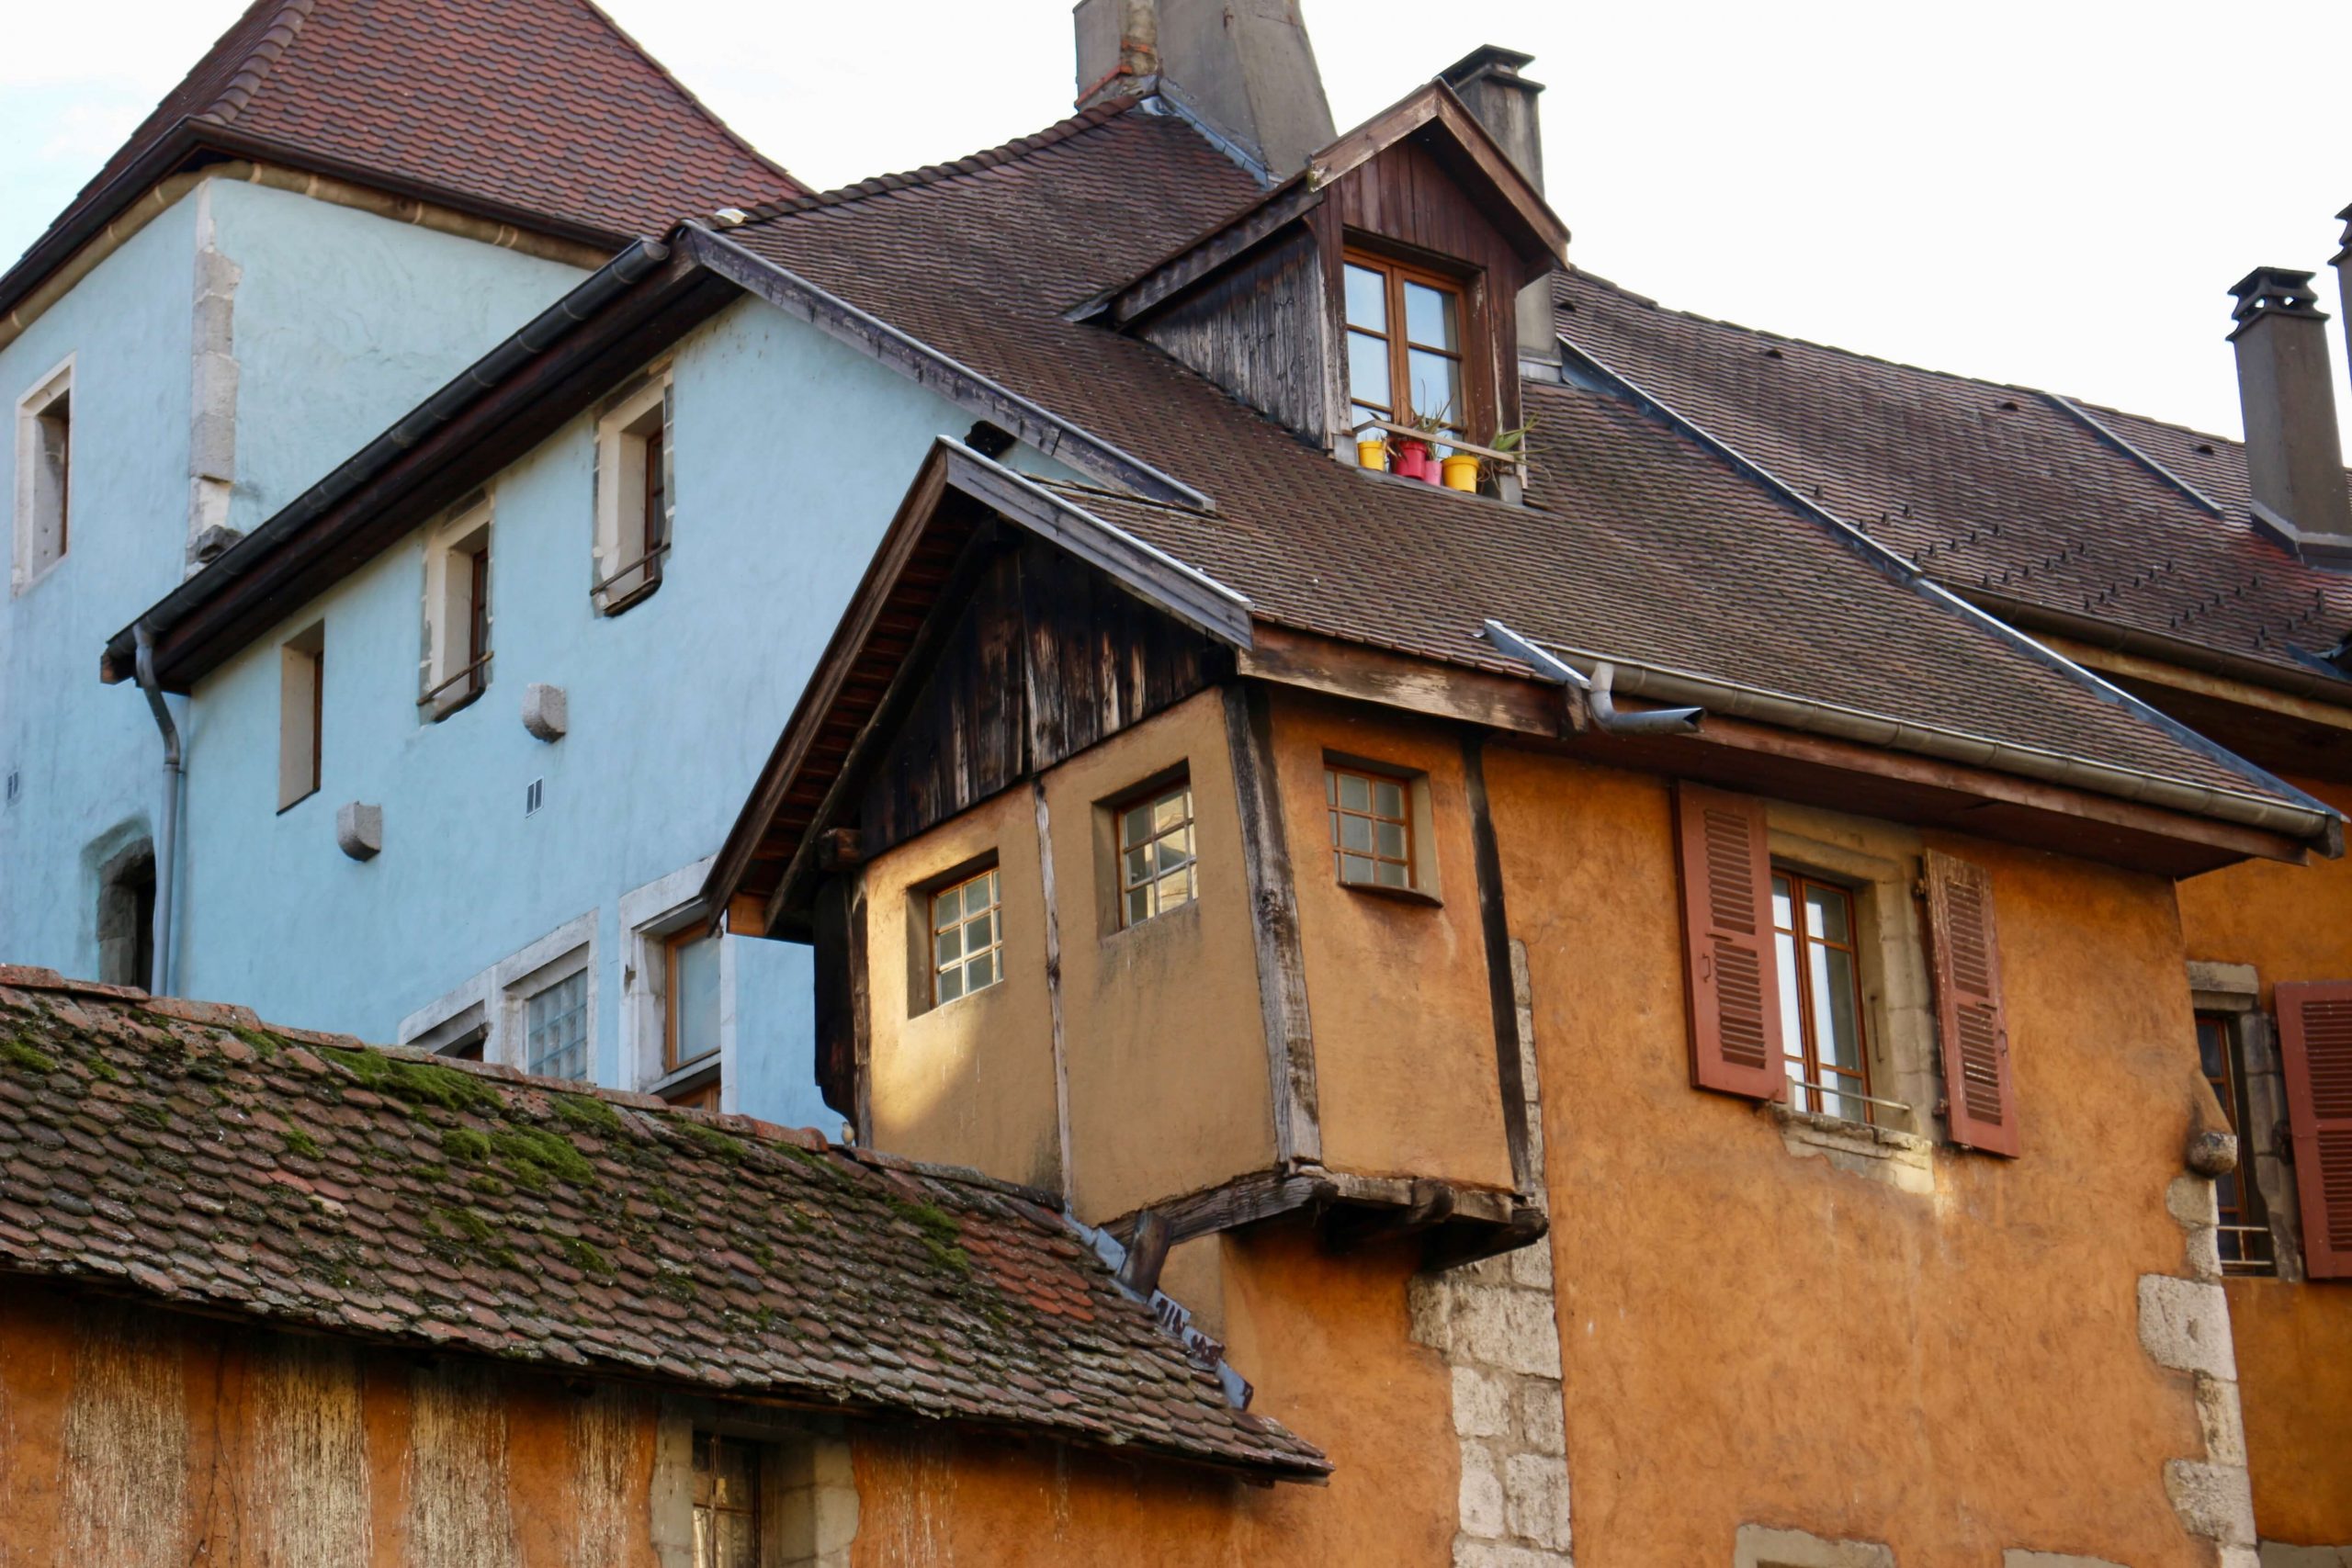 Old houses with roofs at off angles in Annecy, France, houses in which people probably use pink French toilet paper. ©KettiWilhelm2018